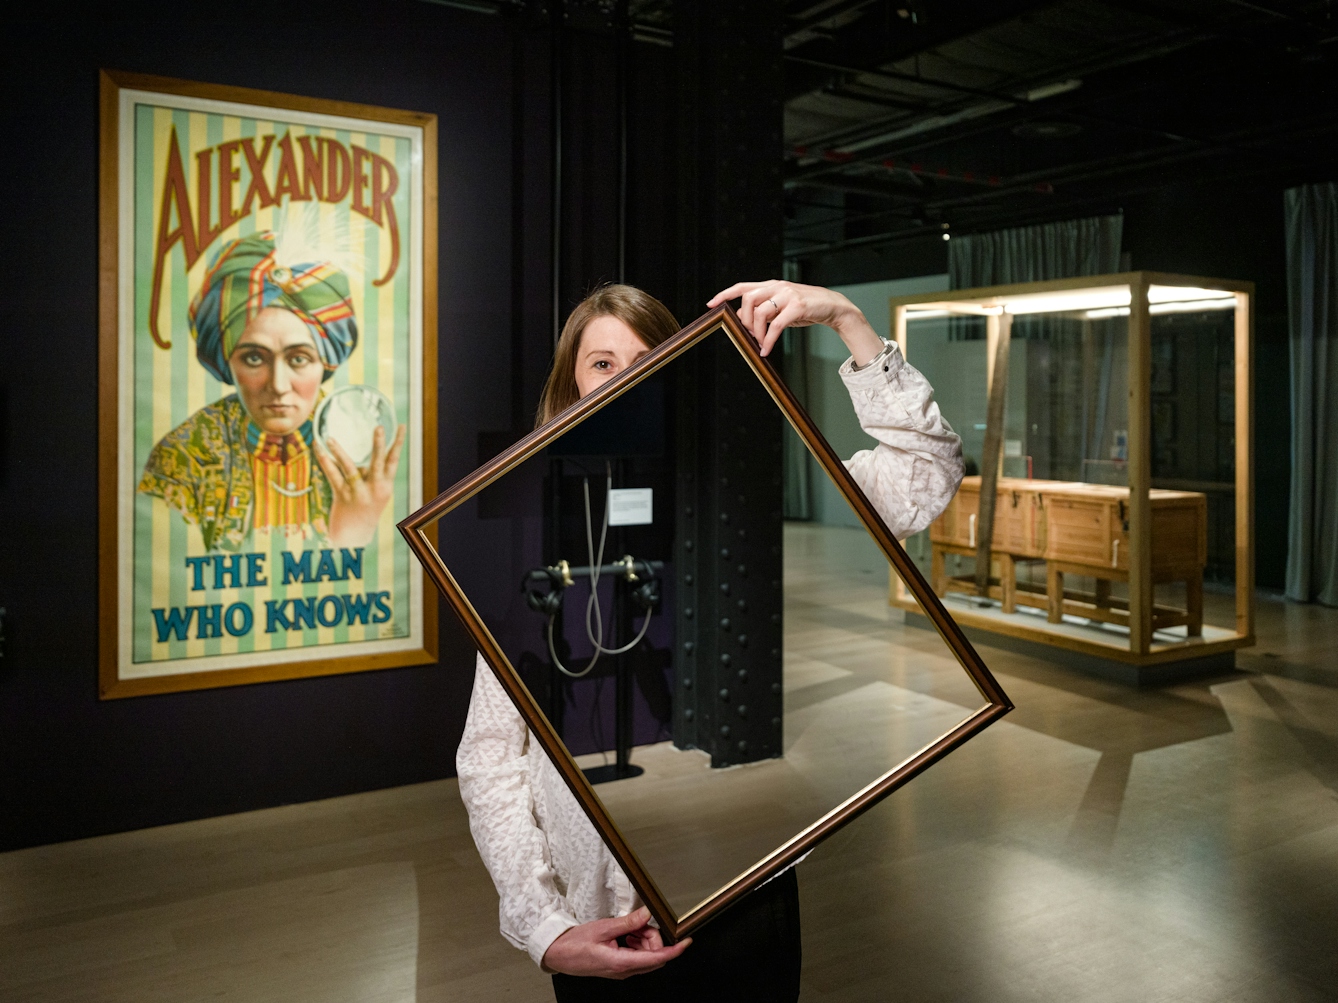 Photograph of a woman in a dark gallery space holding a picture frame in front of her body and part of her face. Within the picture frame you can see straight through her, as if her body and half her face have disappeared. In the background you can see a large historical poster promoting the a magician called "Alexander, the man who knows" and a sawing in half box.